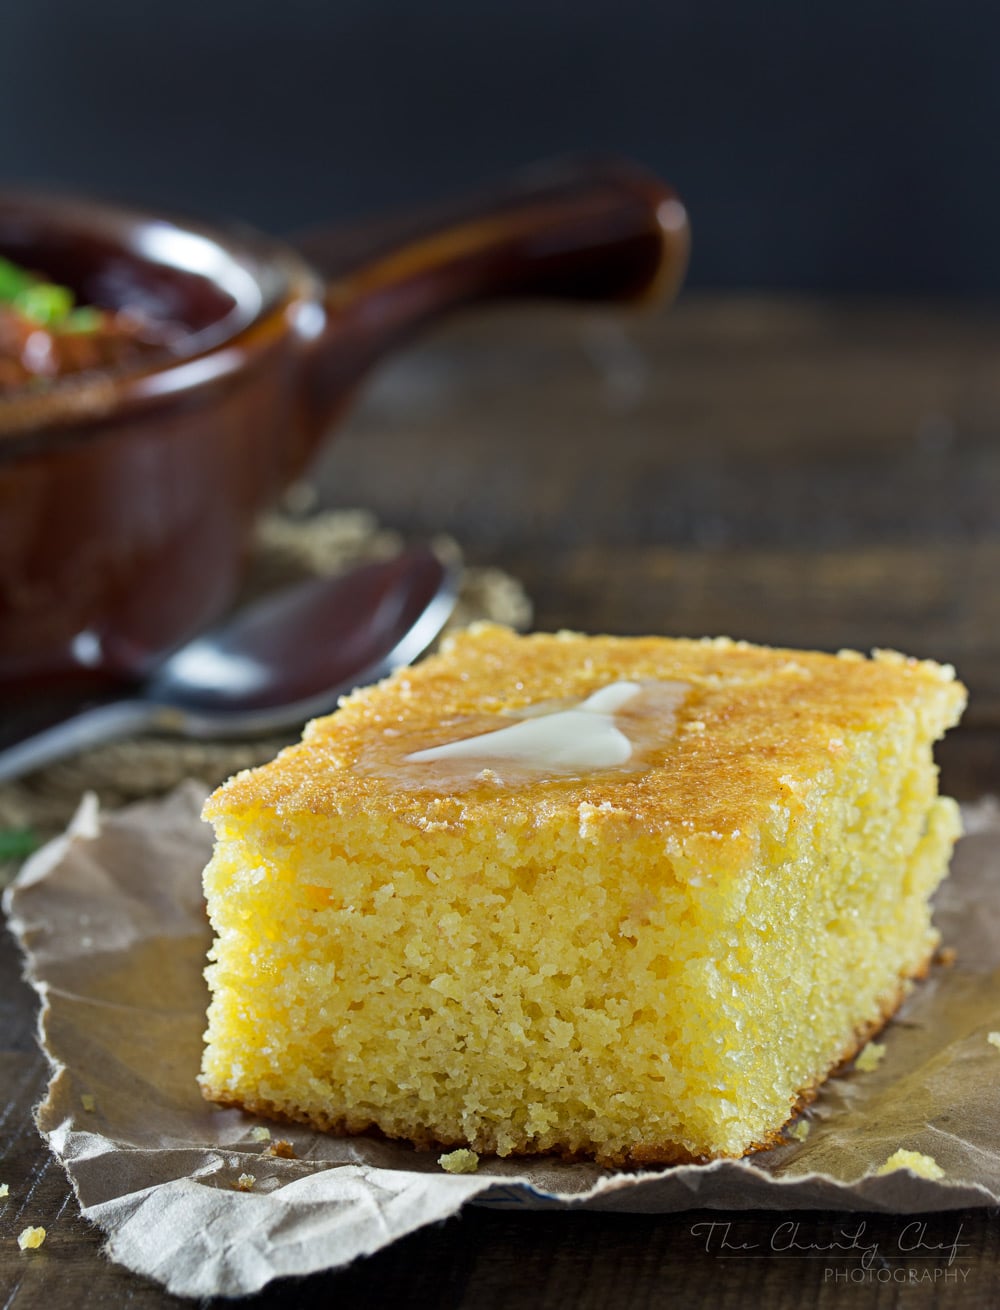 Homestyle Cornbread | This homestyle cornbread is a perfect mix of savory southern cornbread and sweet northern cornbread... fluffy and soft, it's the only recipe you'll need! | http://thechunkychef.com